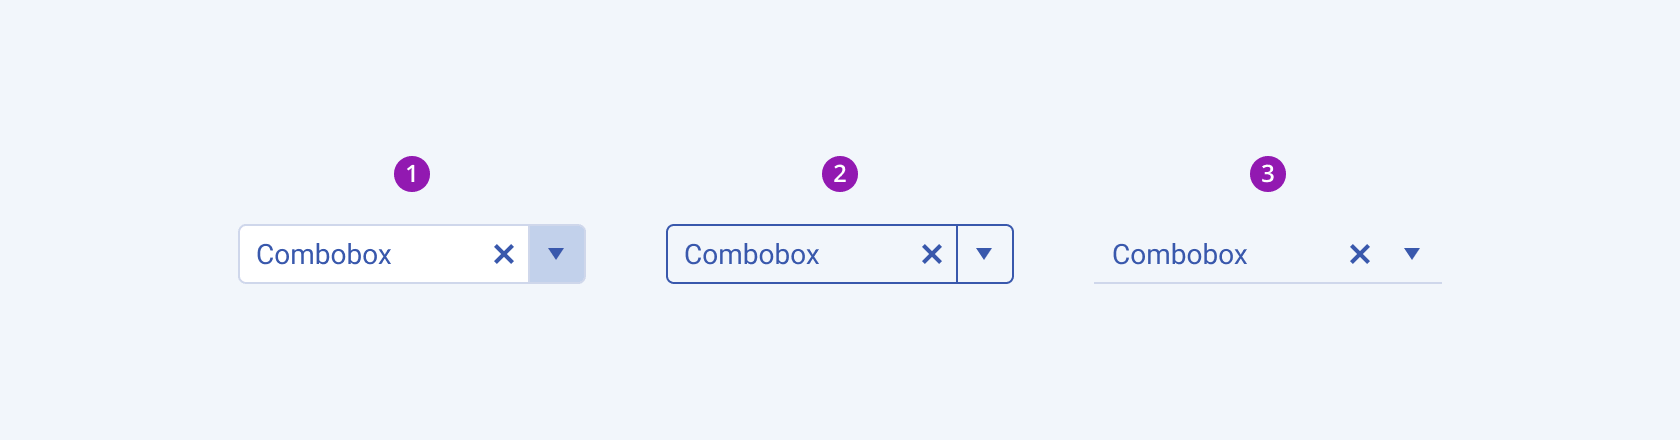 Three Telerik and Kendo UI ComboBox components demonstrating the default solid, outline, and flat fill modes respectively.